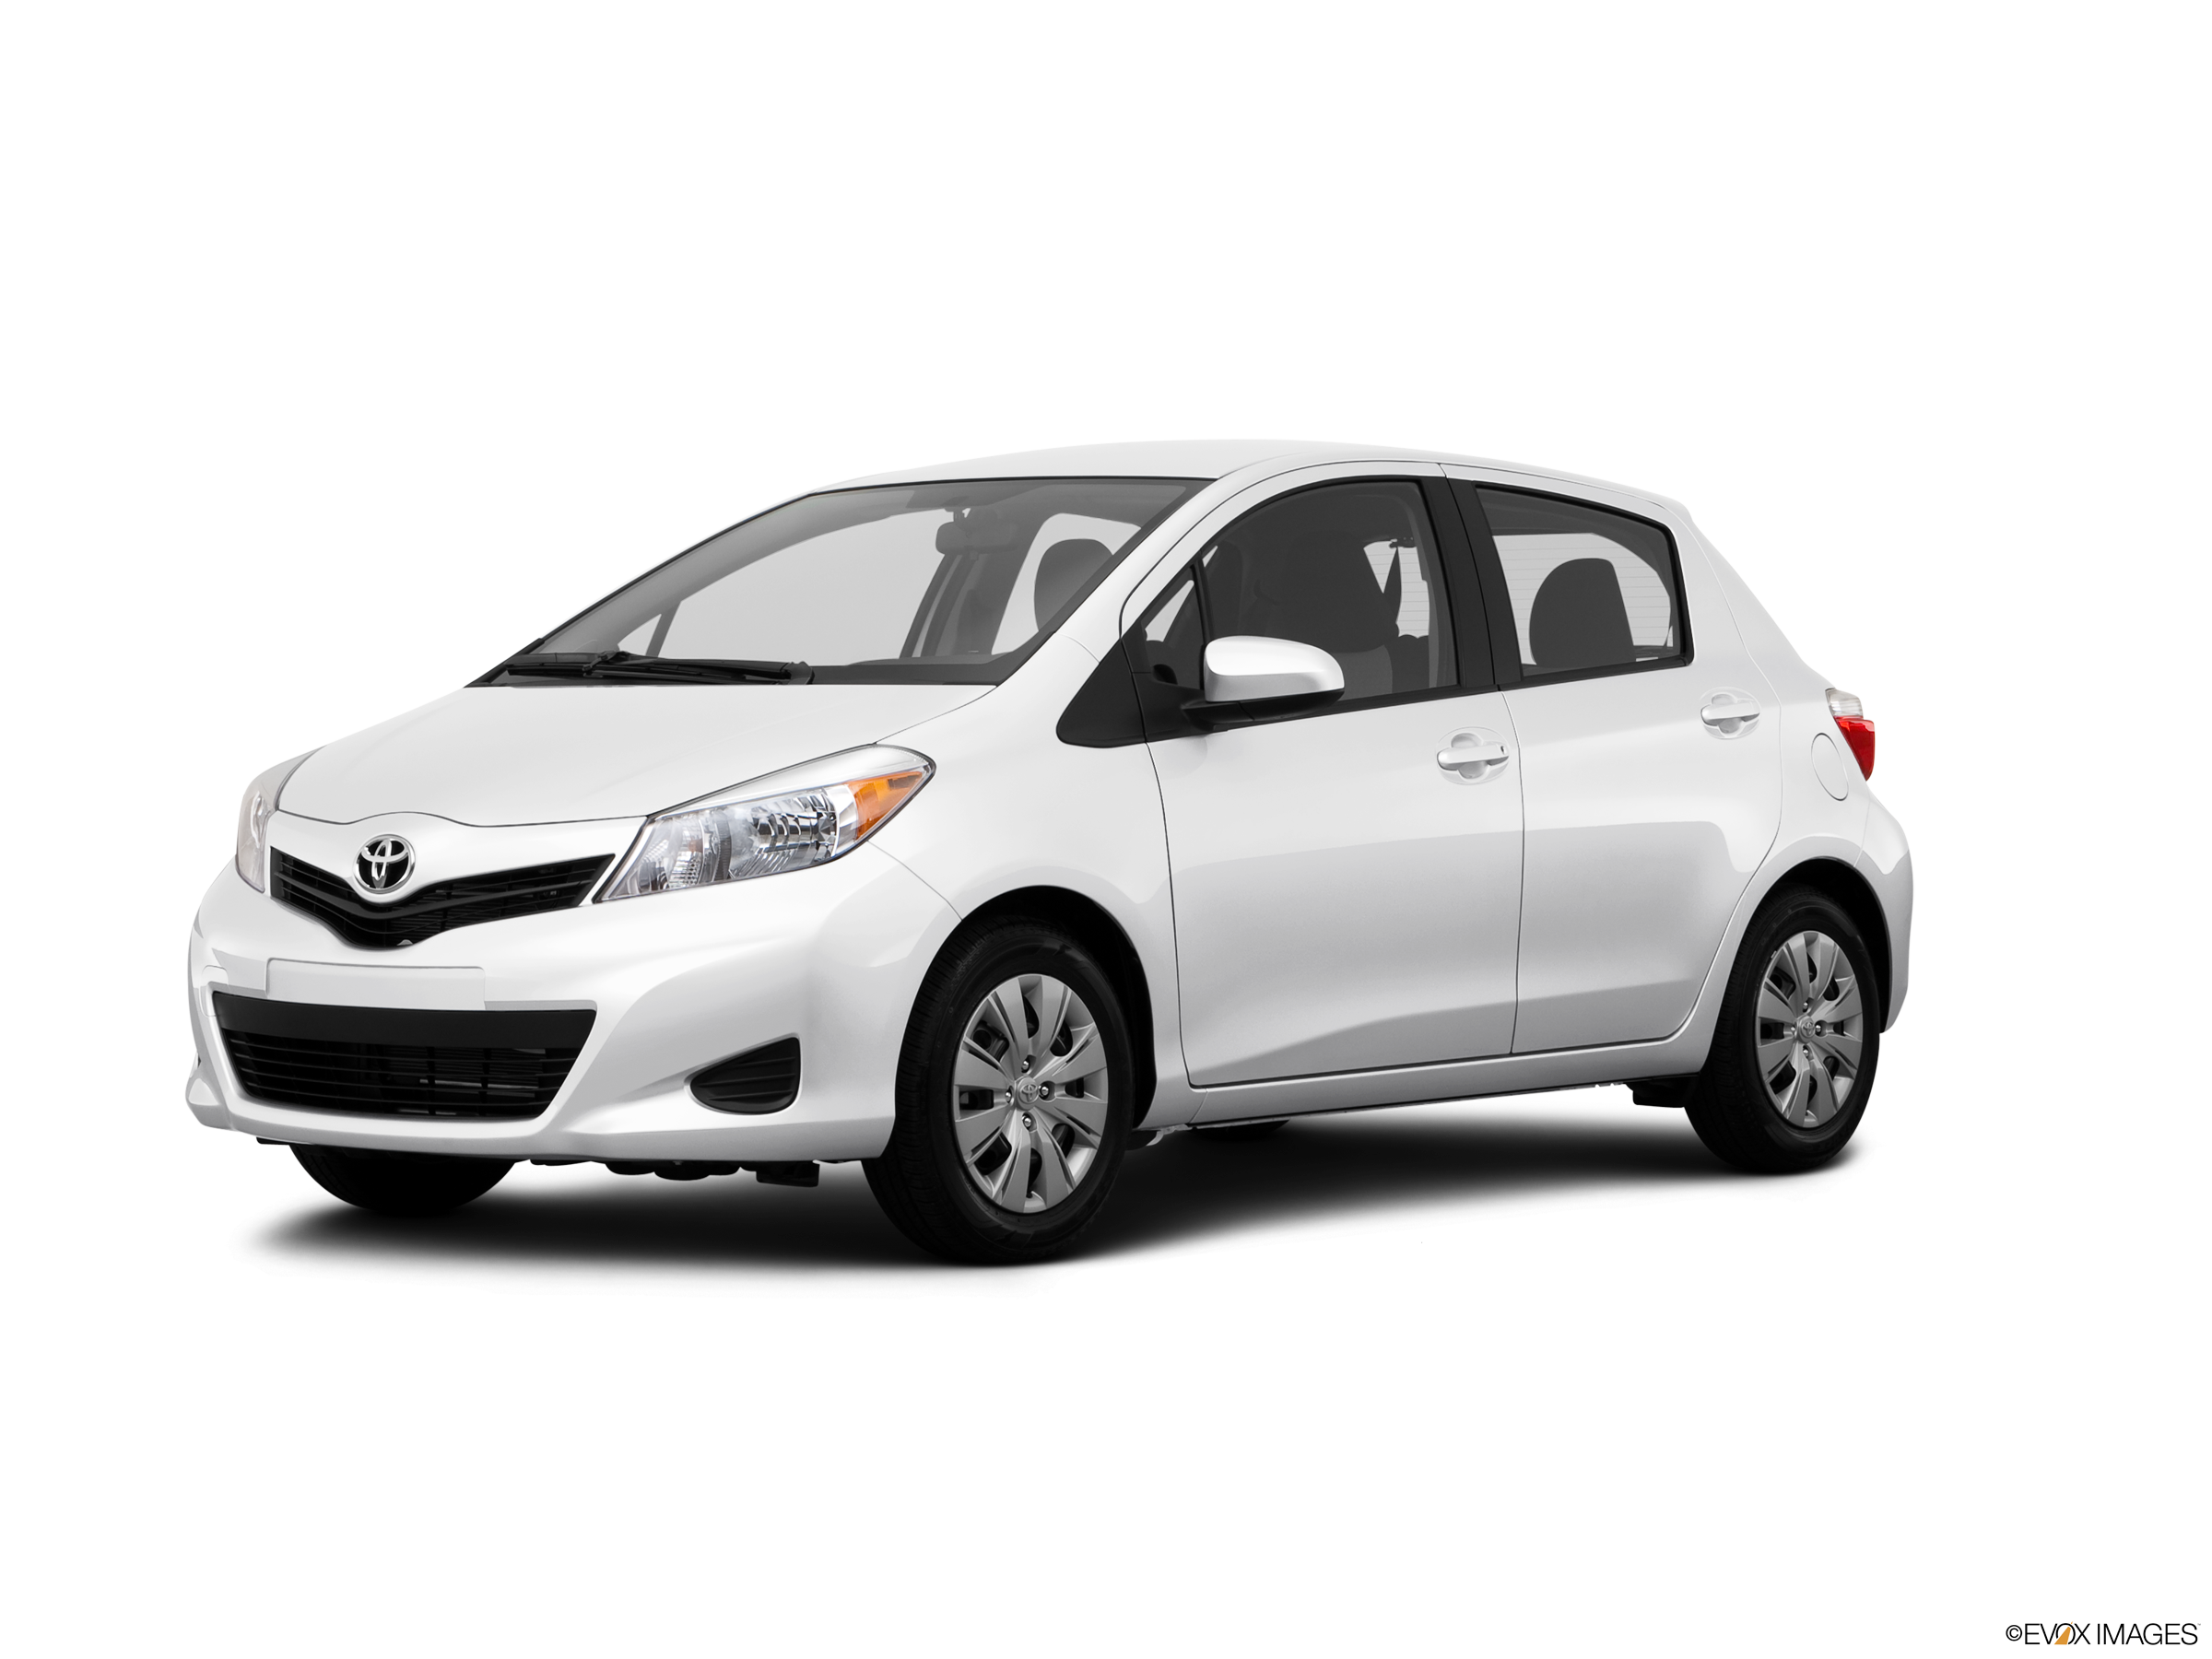 2014 Toyota Yaris  News reviews picture galleries and videos  The Car  Guide